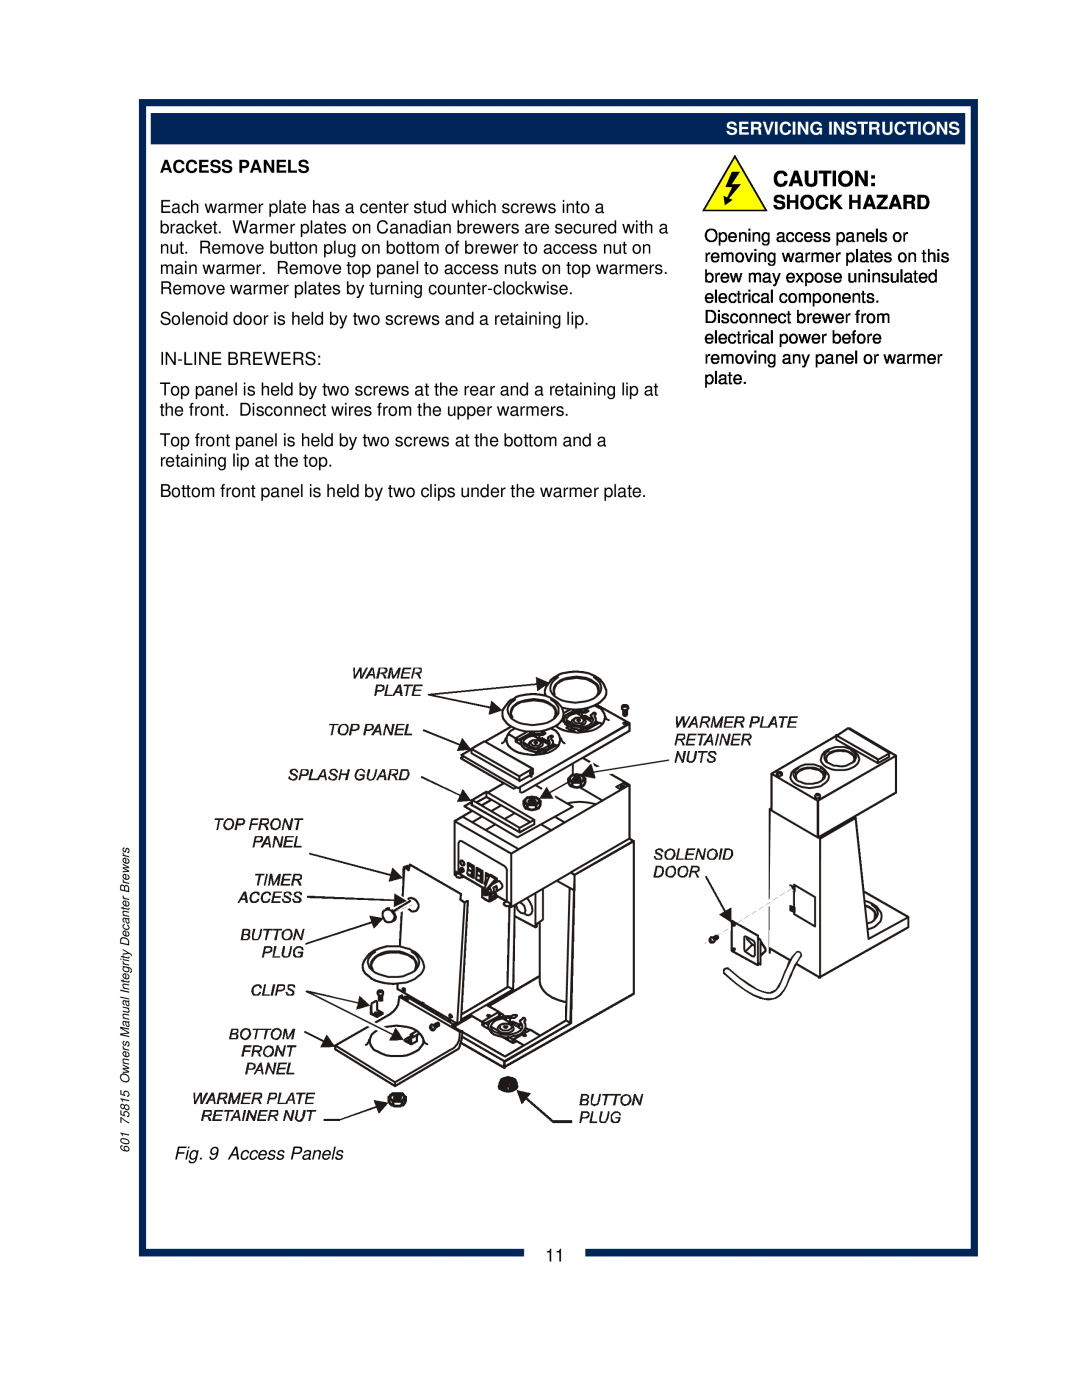 Bloomfield 9016, 9010, 9012 owner manual Shock Hazard, Access Panels, Servicing Instructions 